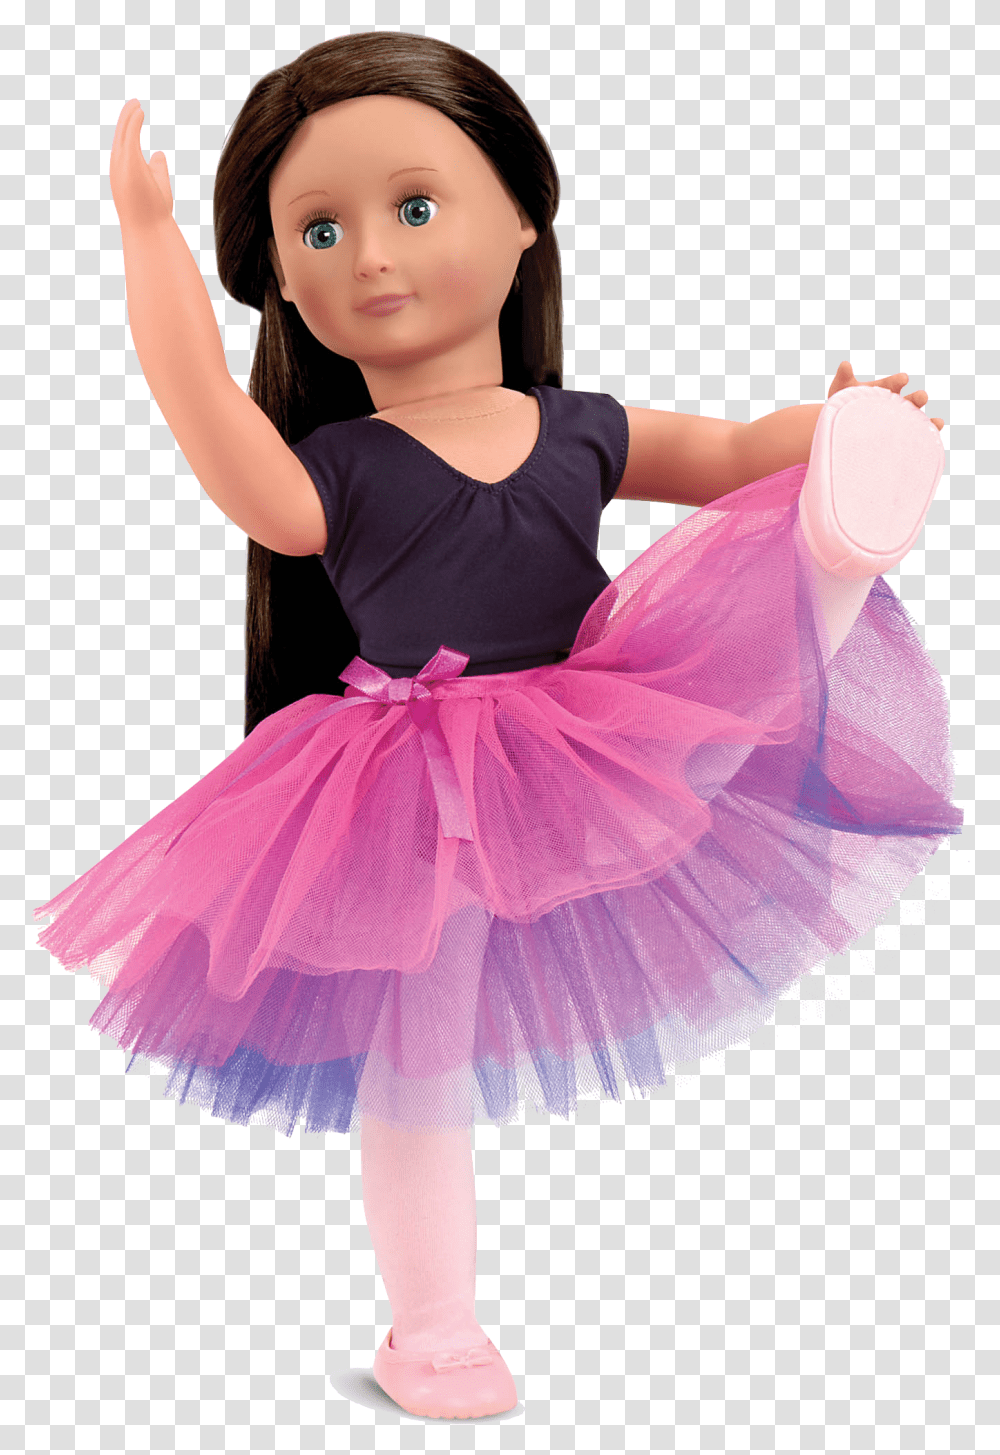 Dance Tulle You Drop Ballet Outfit Willow Wearing, Person, Human, Toy, Doll Transparent Png